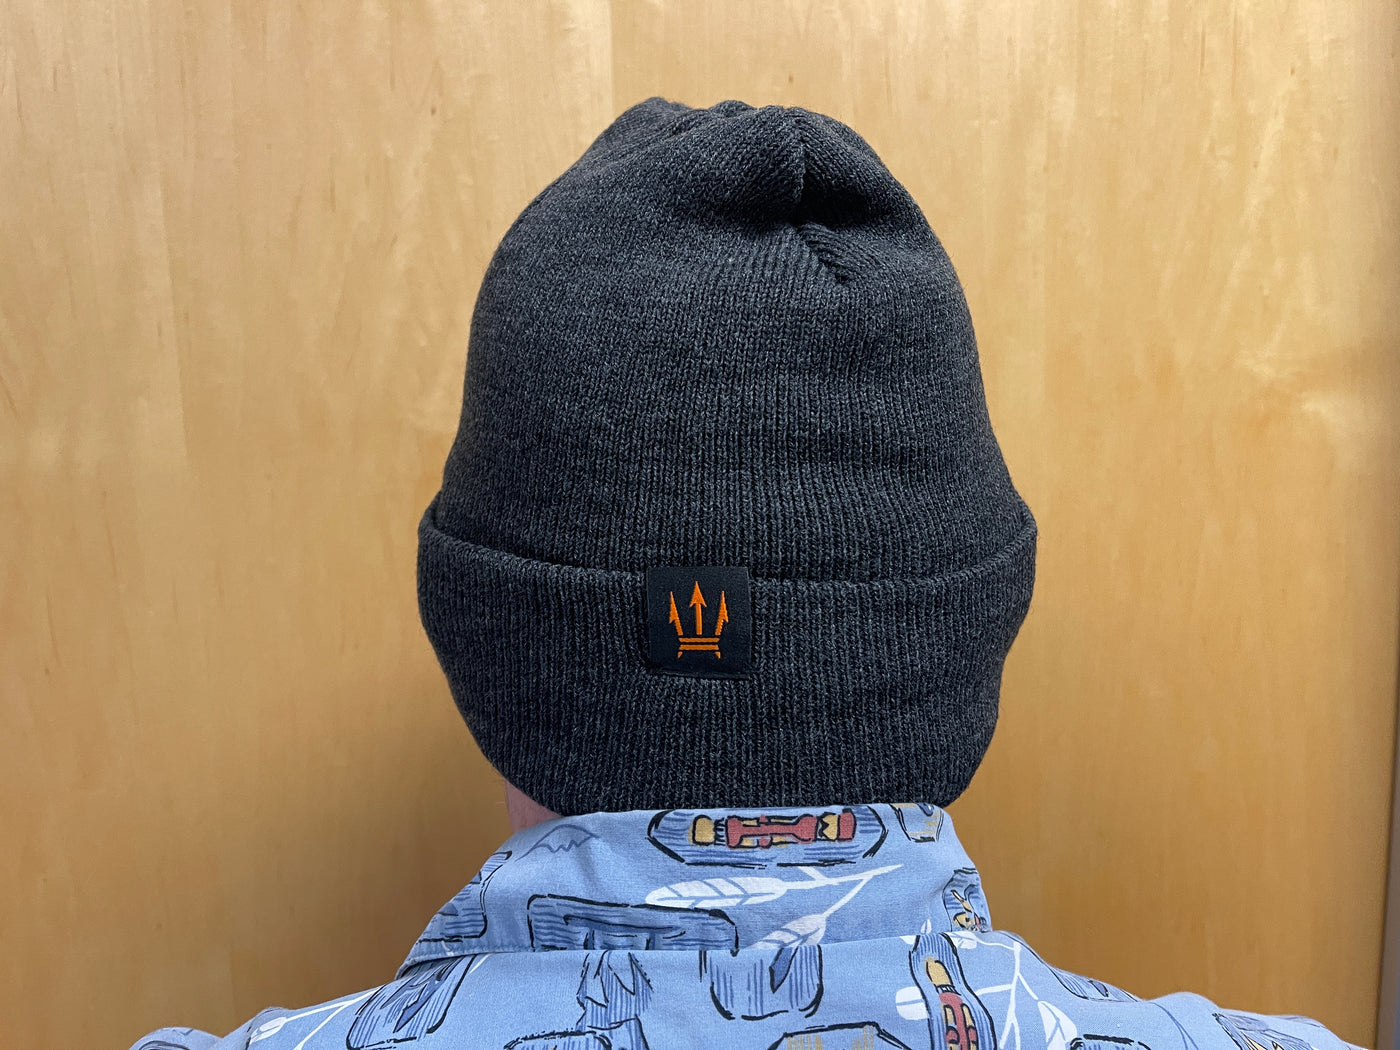 Isotherm - Trident Knit Beanie by Maratac®